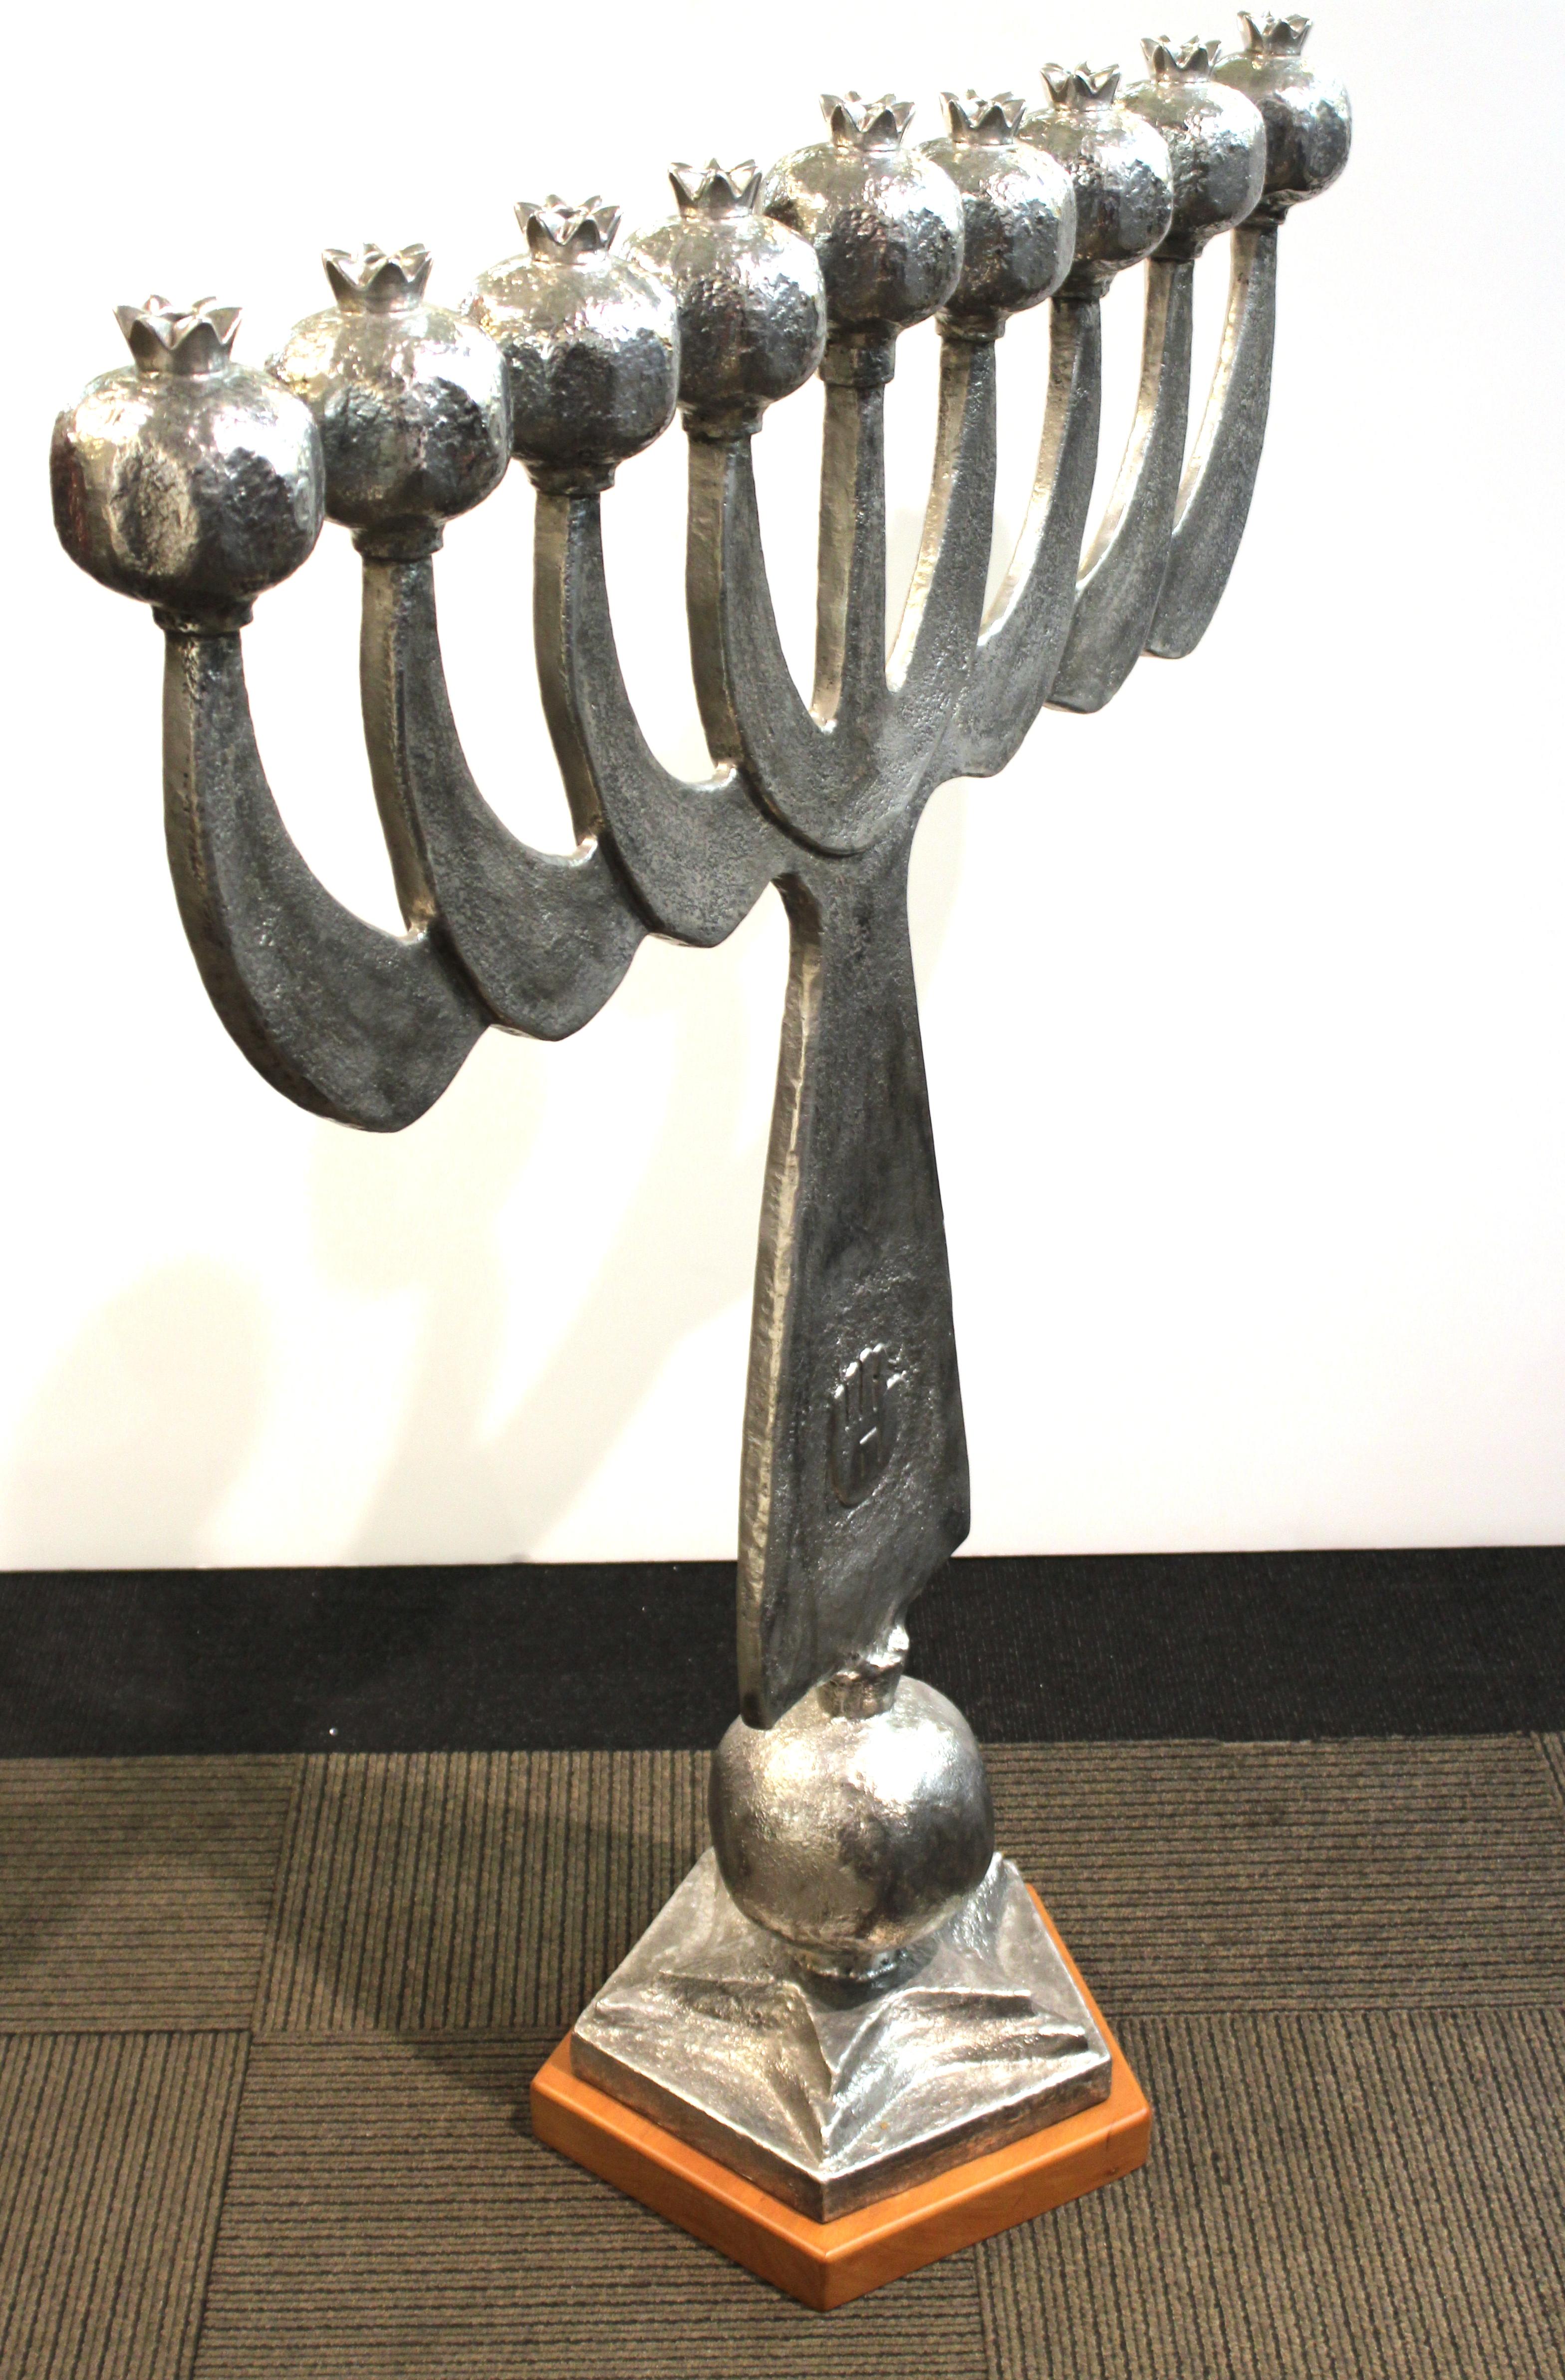 Modern cast aluminium menorah by Oded Halahmy, titled 'Light For Morocco', created in 2011. Marked by the artist and dated on the side. In great vintage condition.